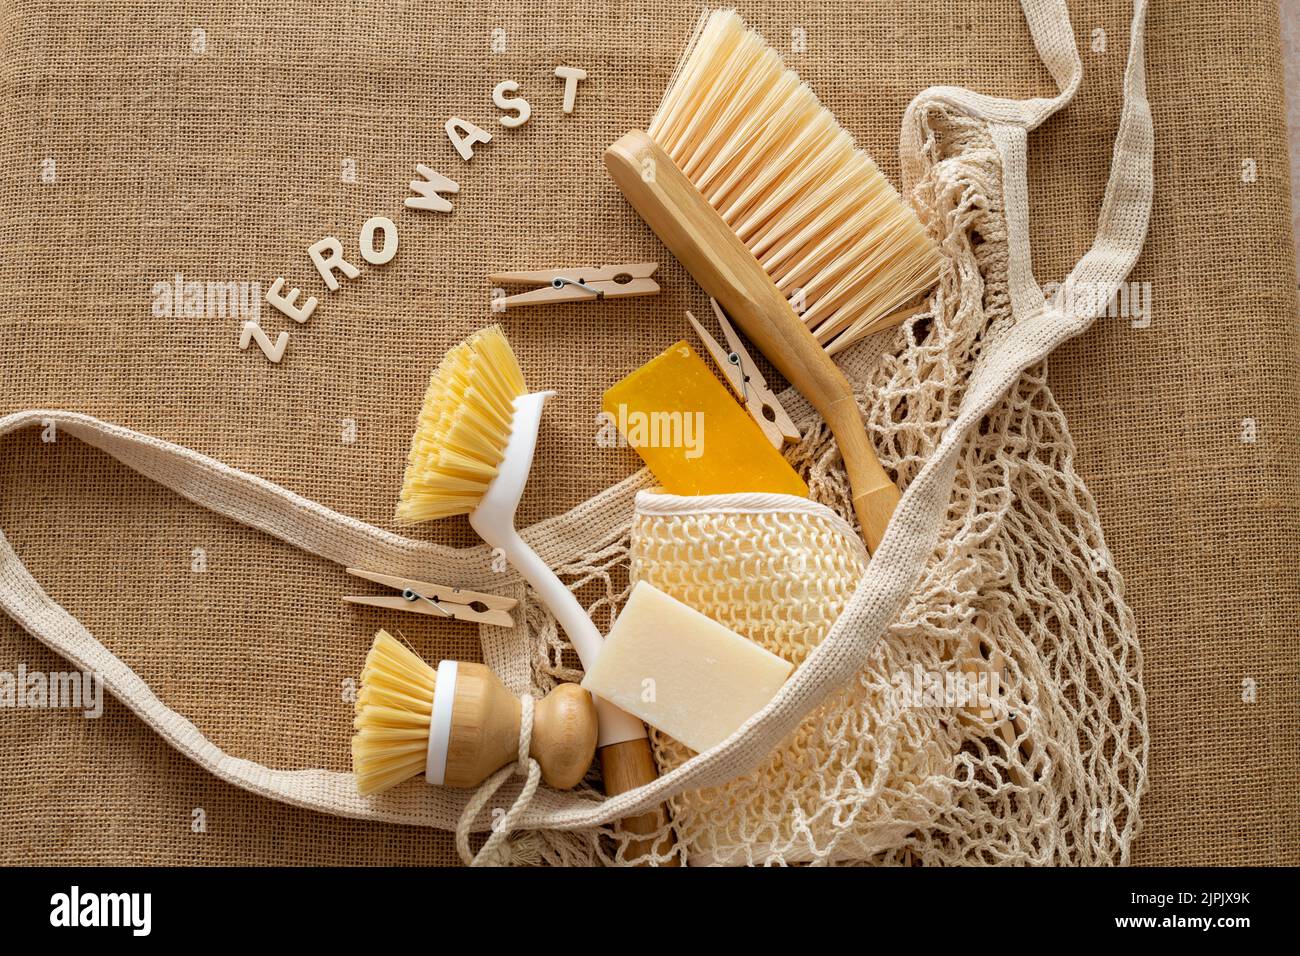 Mesh market bag eco-friendly accessories ecological brushes for kitchen , wooden clothespins ,dish brush, natural cleaning products on burlap Stock Photo